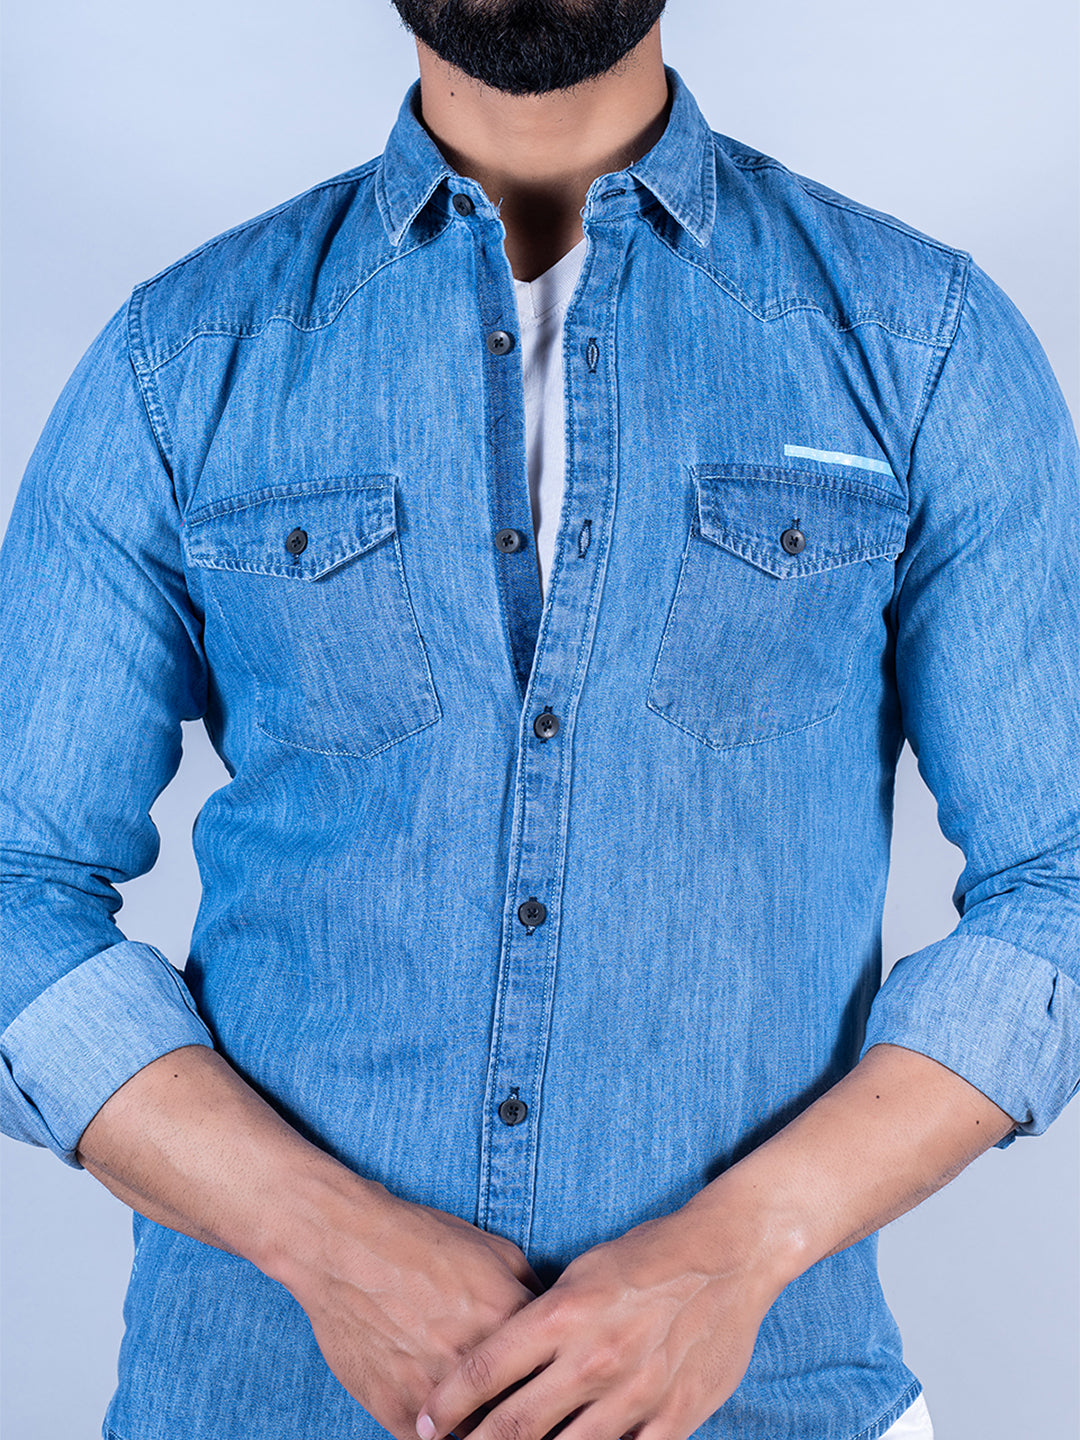 Denim Shirt Spring Outfit Special! Introducing stylish outfits &  recommended items using men's royal spring clothes. | Men's Fashion Media  OTOKOMAE